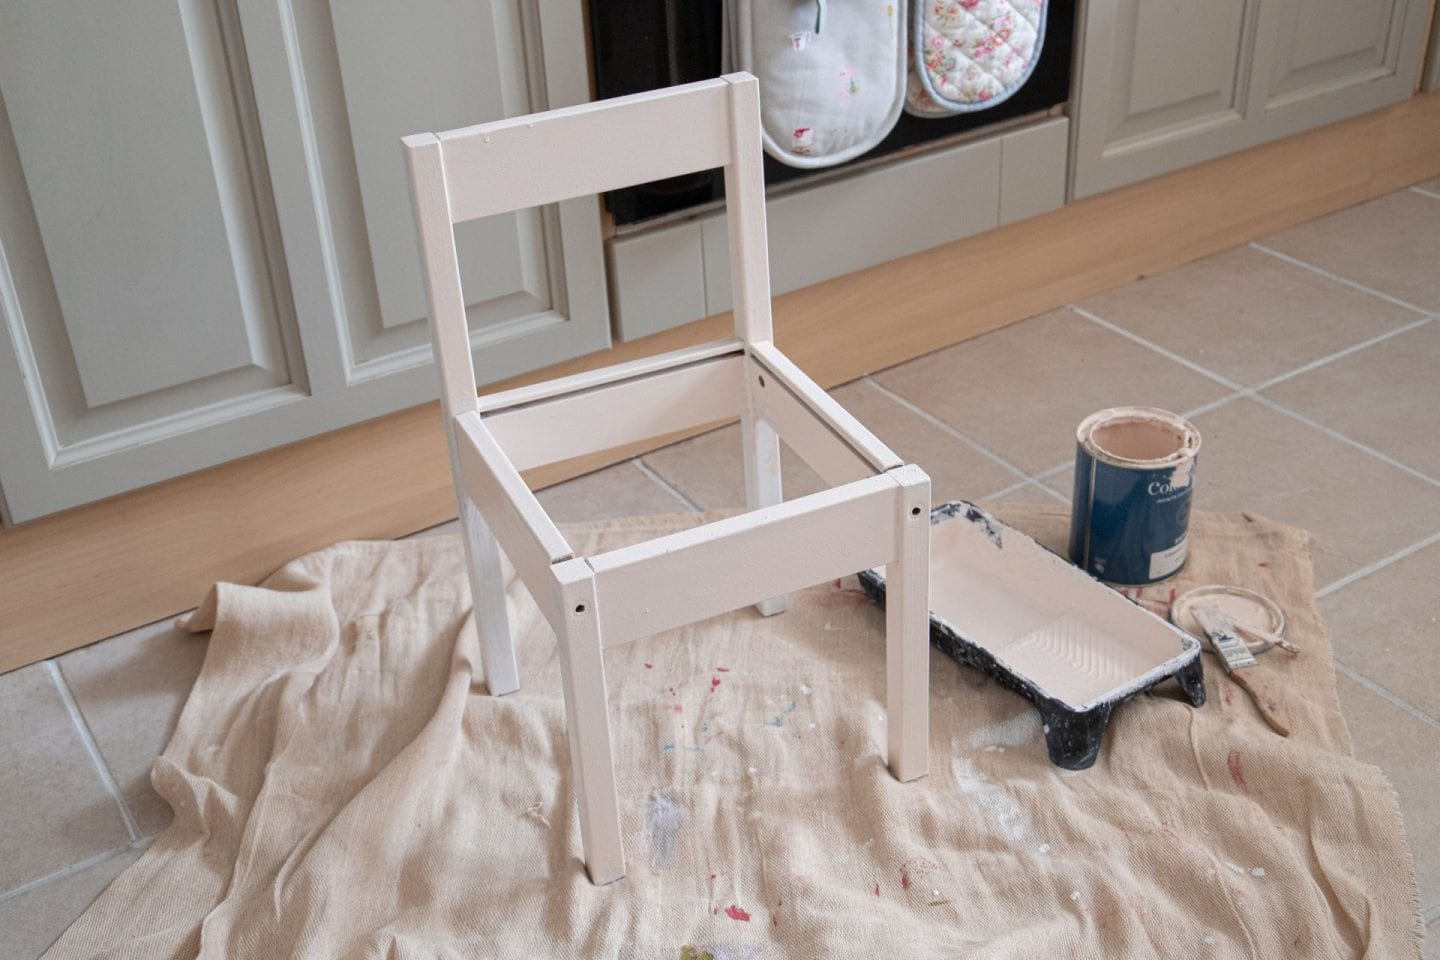 How to paint Ikea furniture correctly